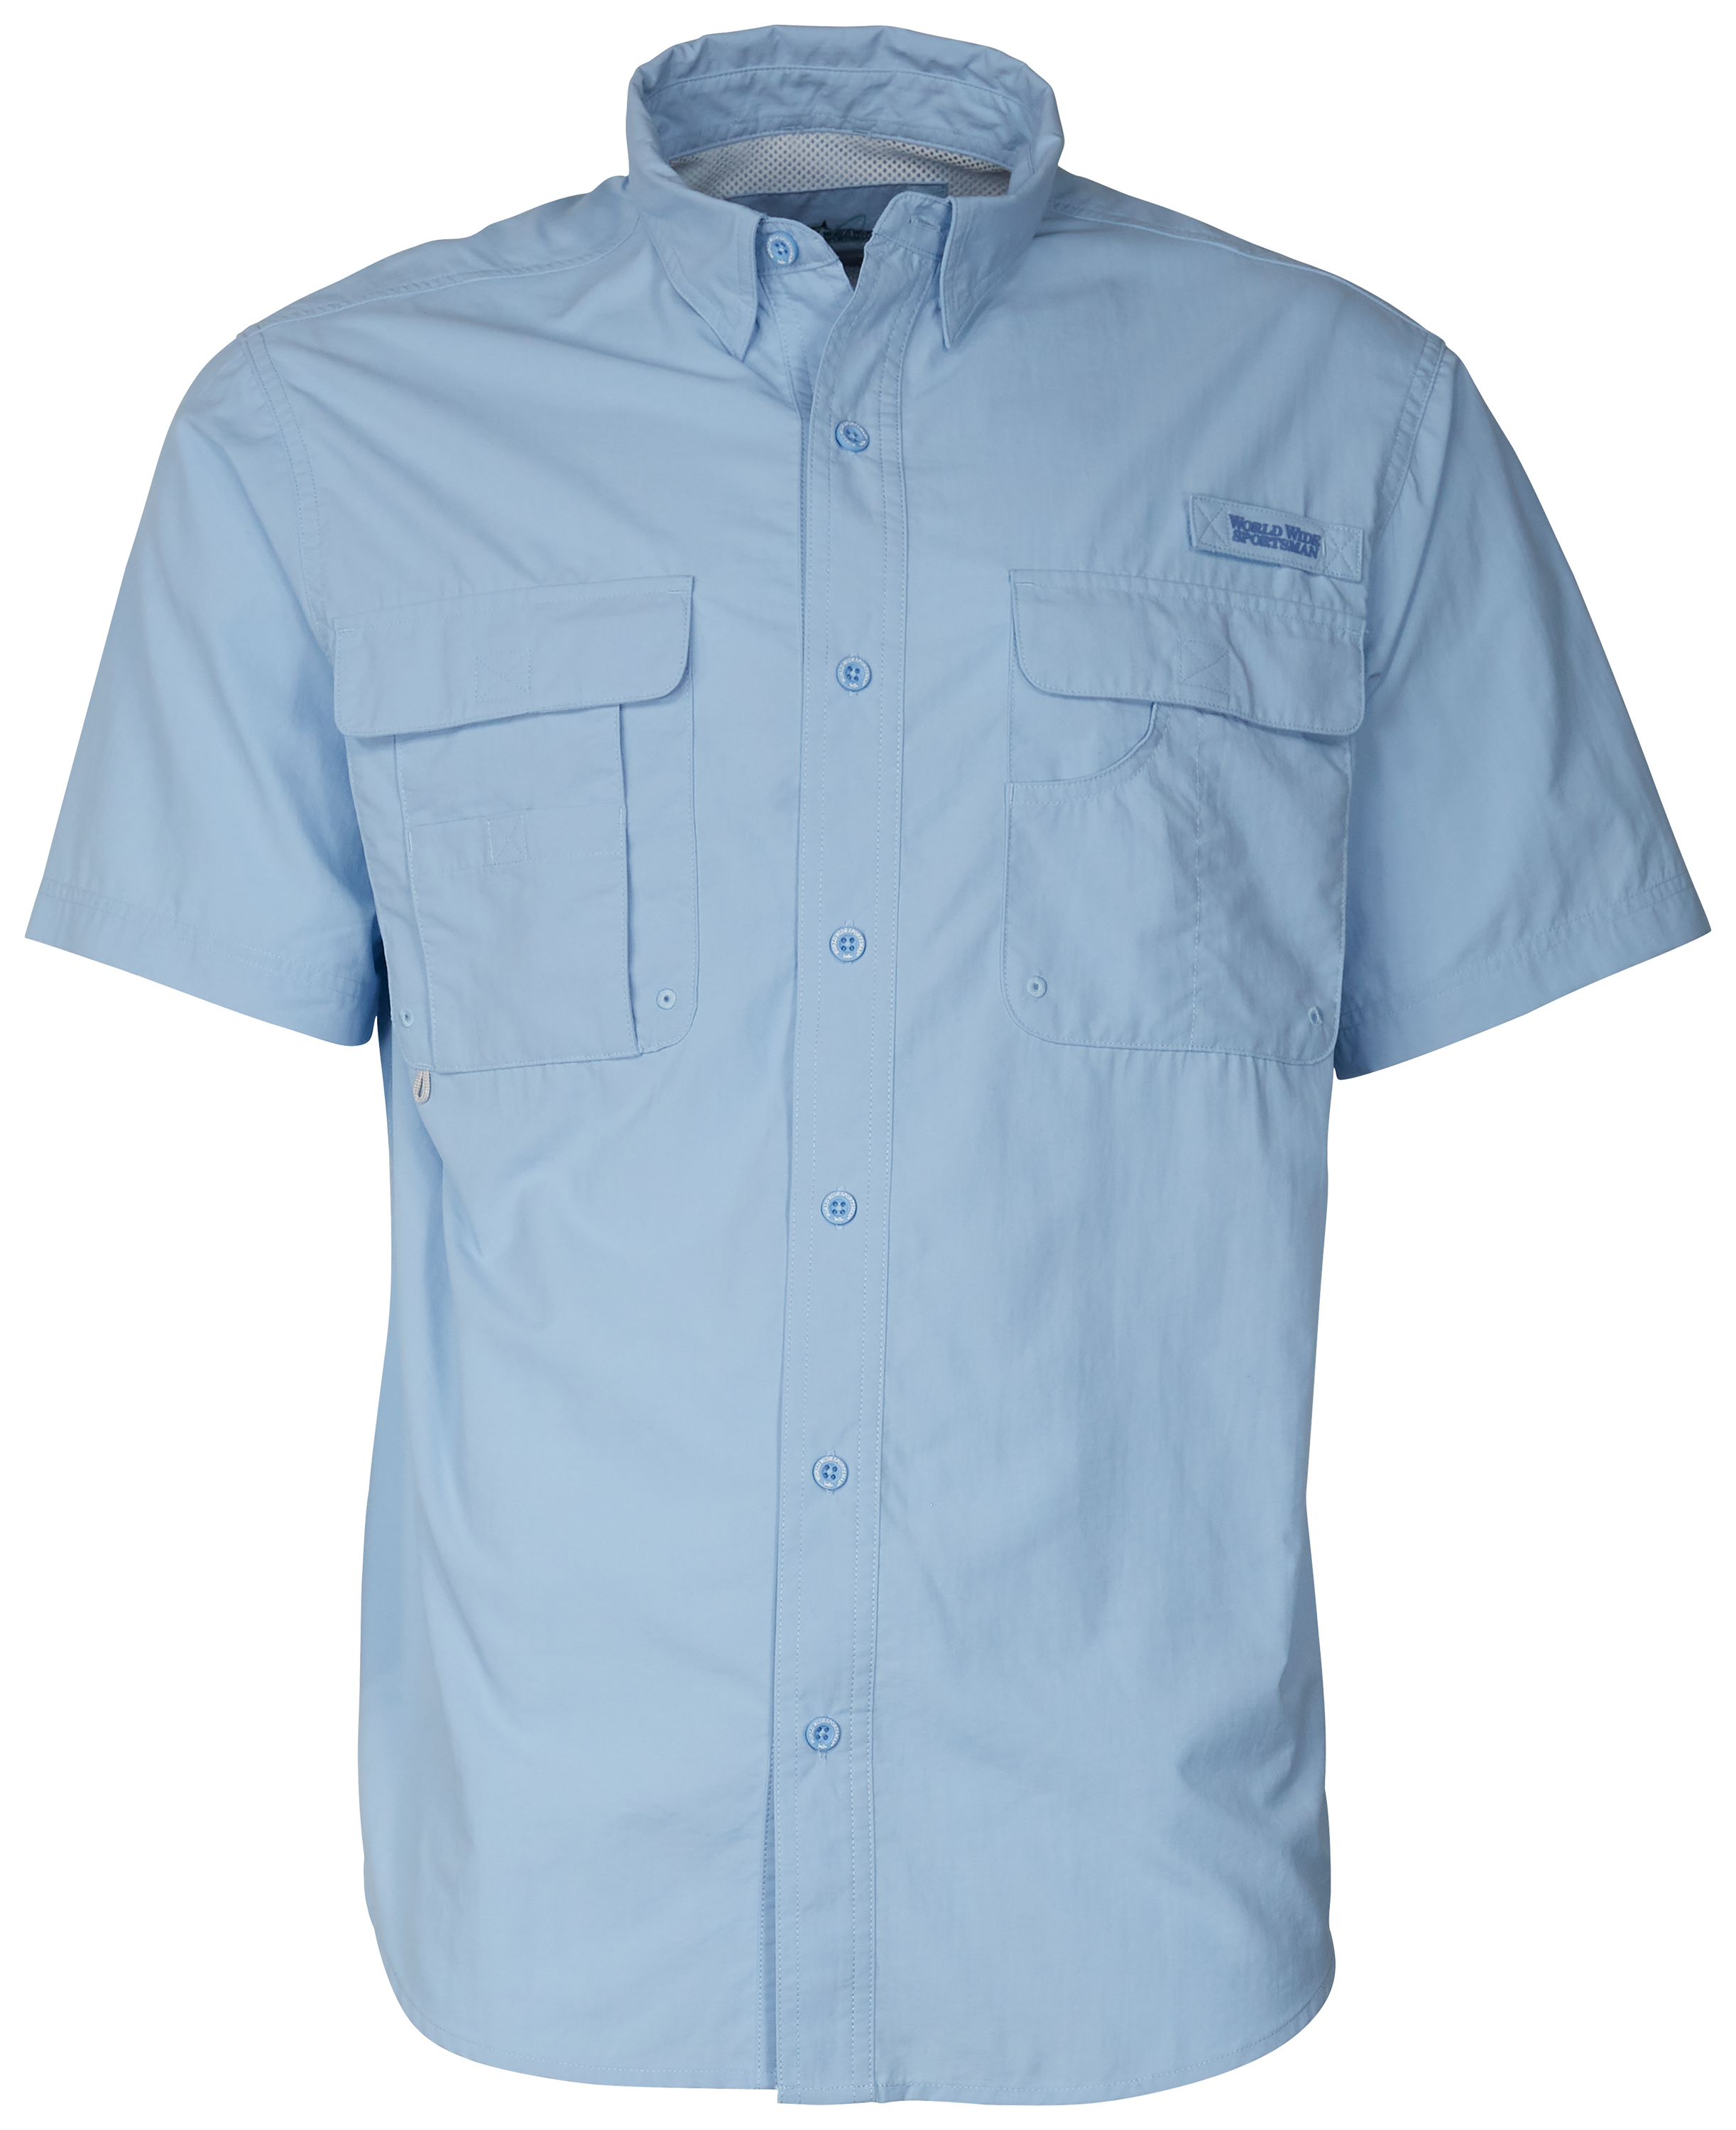 World Wide Sportsman Recycled-Nylon Angler 2.0 Short-Sleeve Button-Down Shirt for Men - Placid Blue - XL